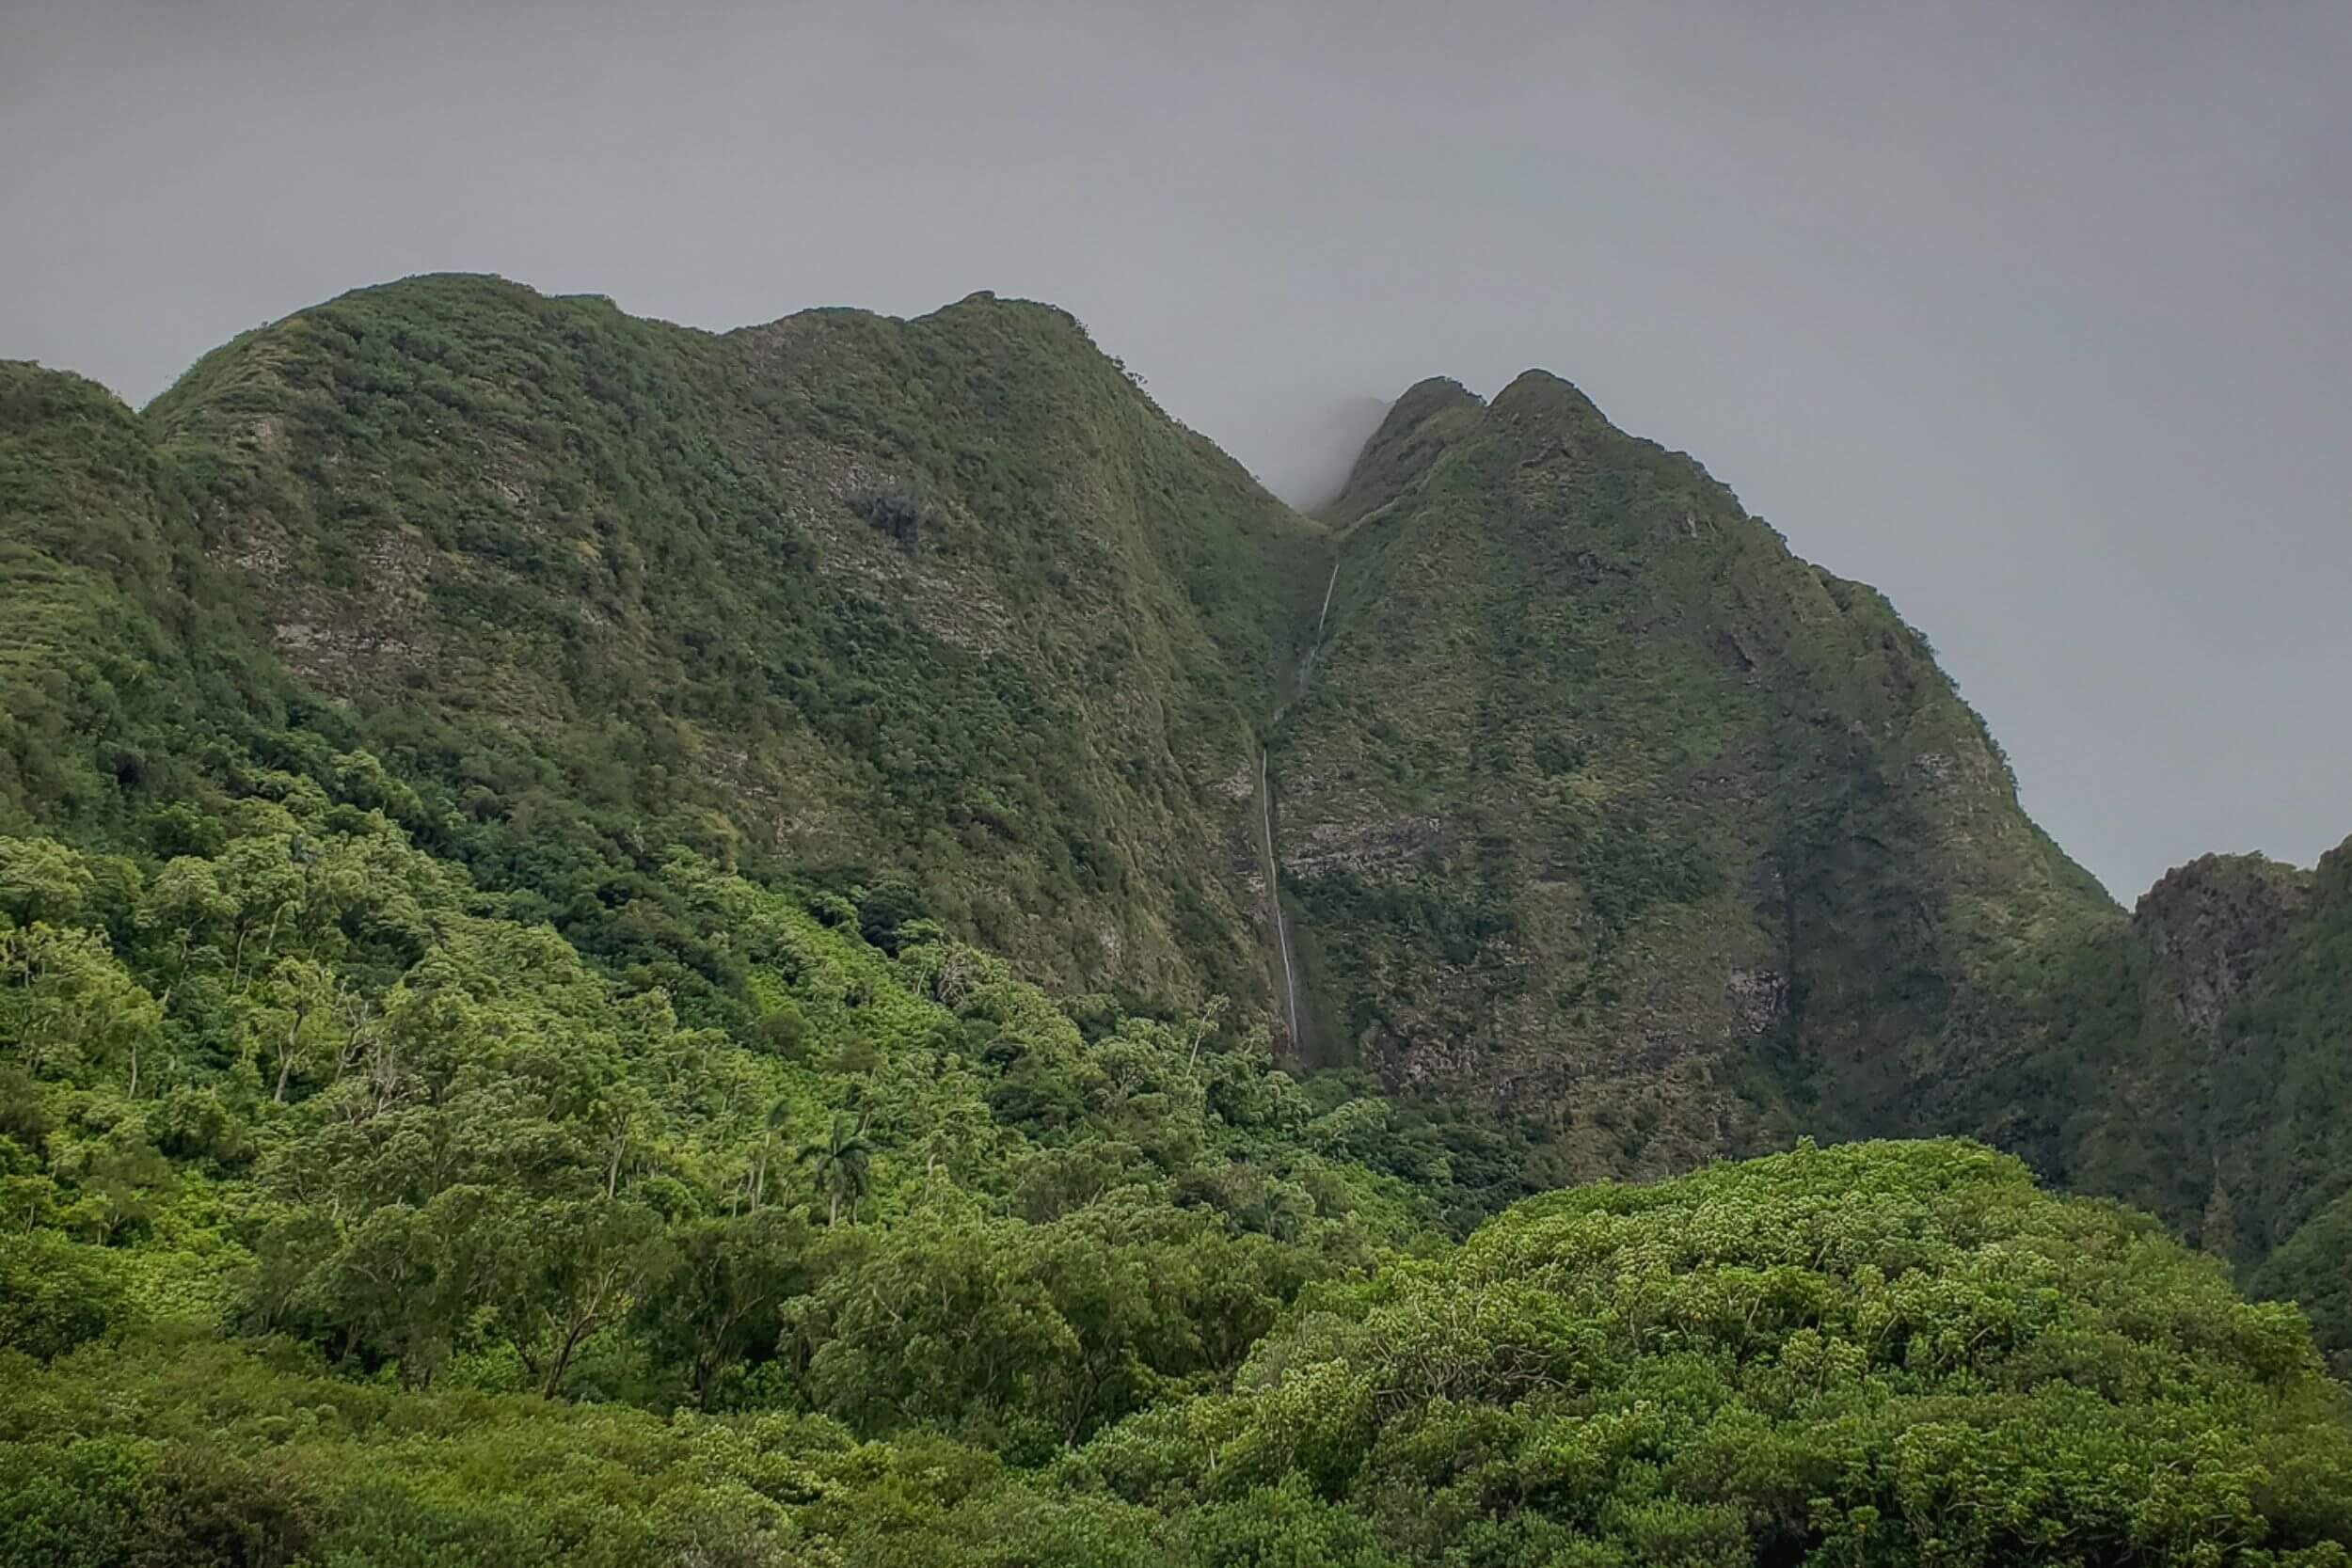 Iao Valley National Monument